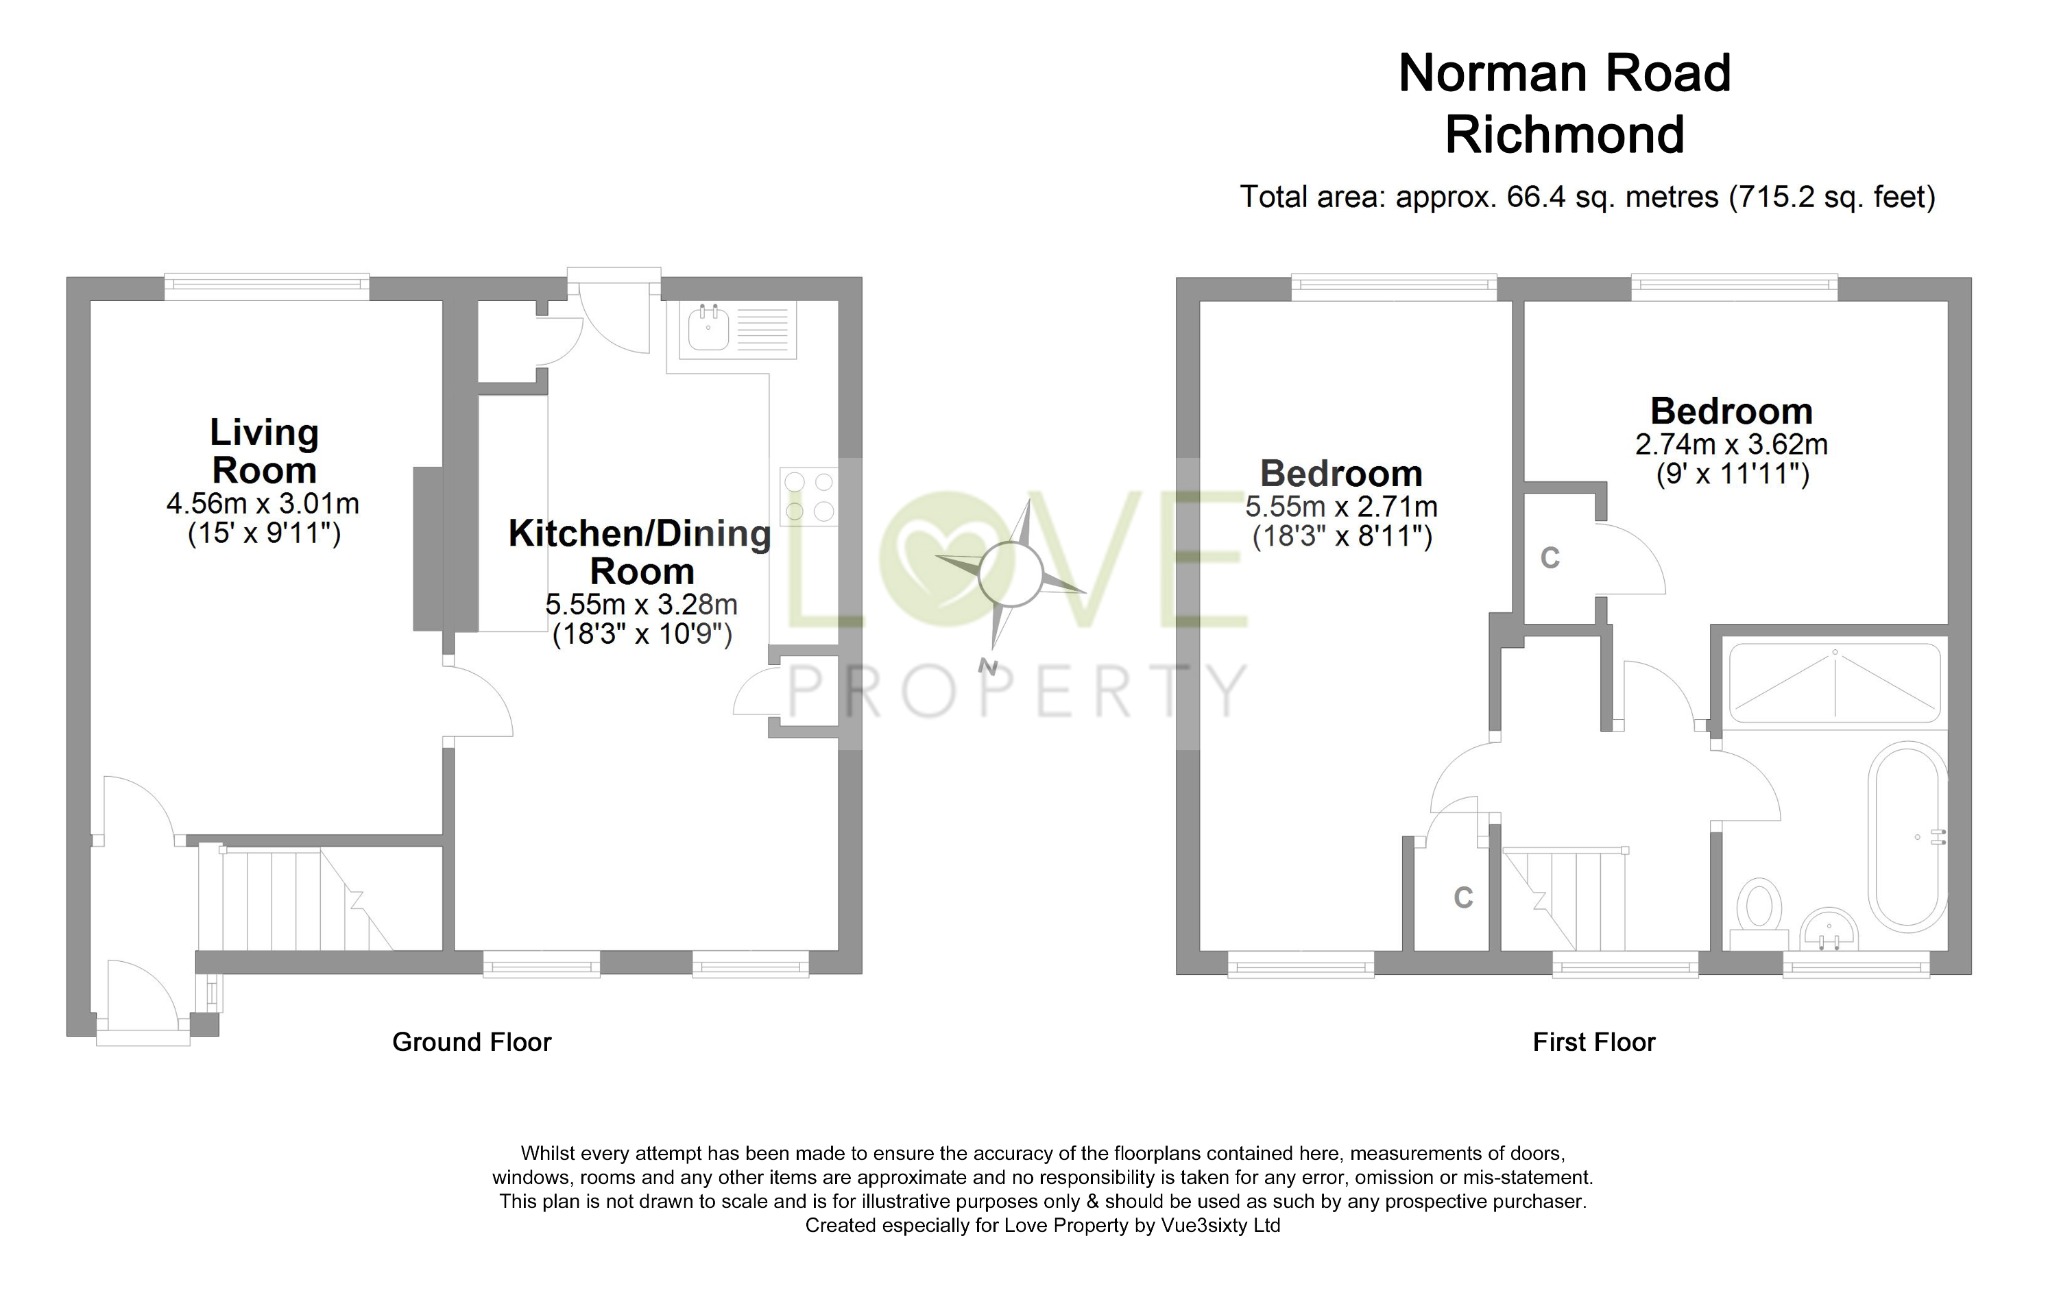 2 bed terraced house to rent in Norman Road, Richmond - Property floorplan